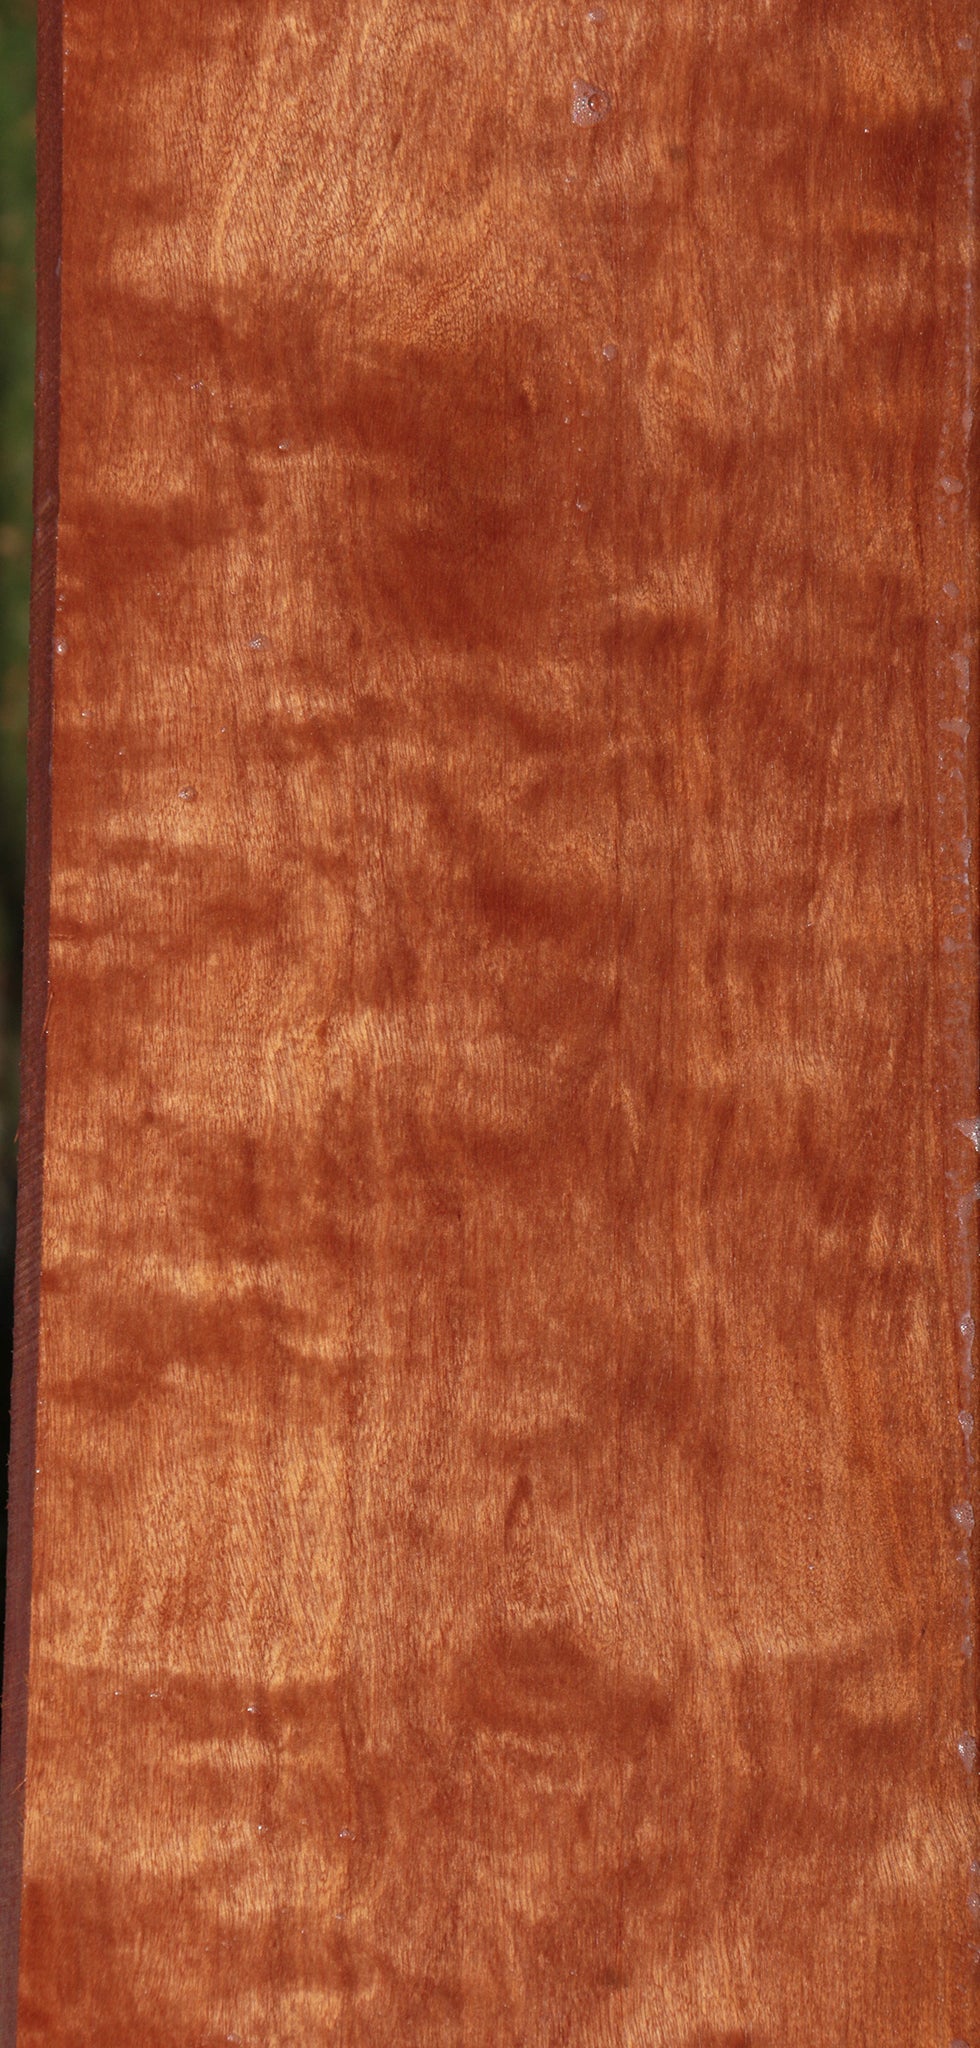 Extra Fancy Curly Makore Lumber